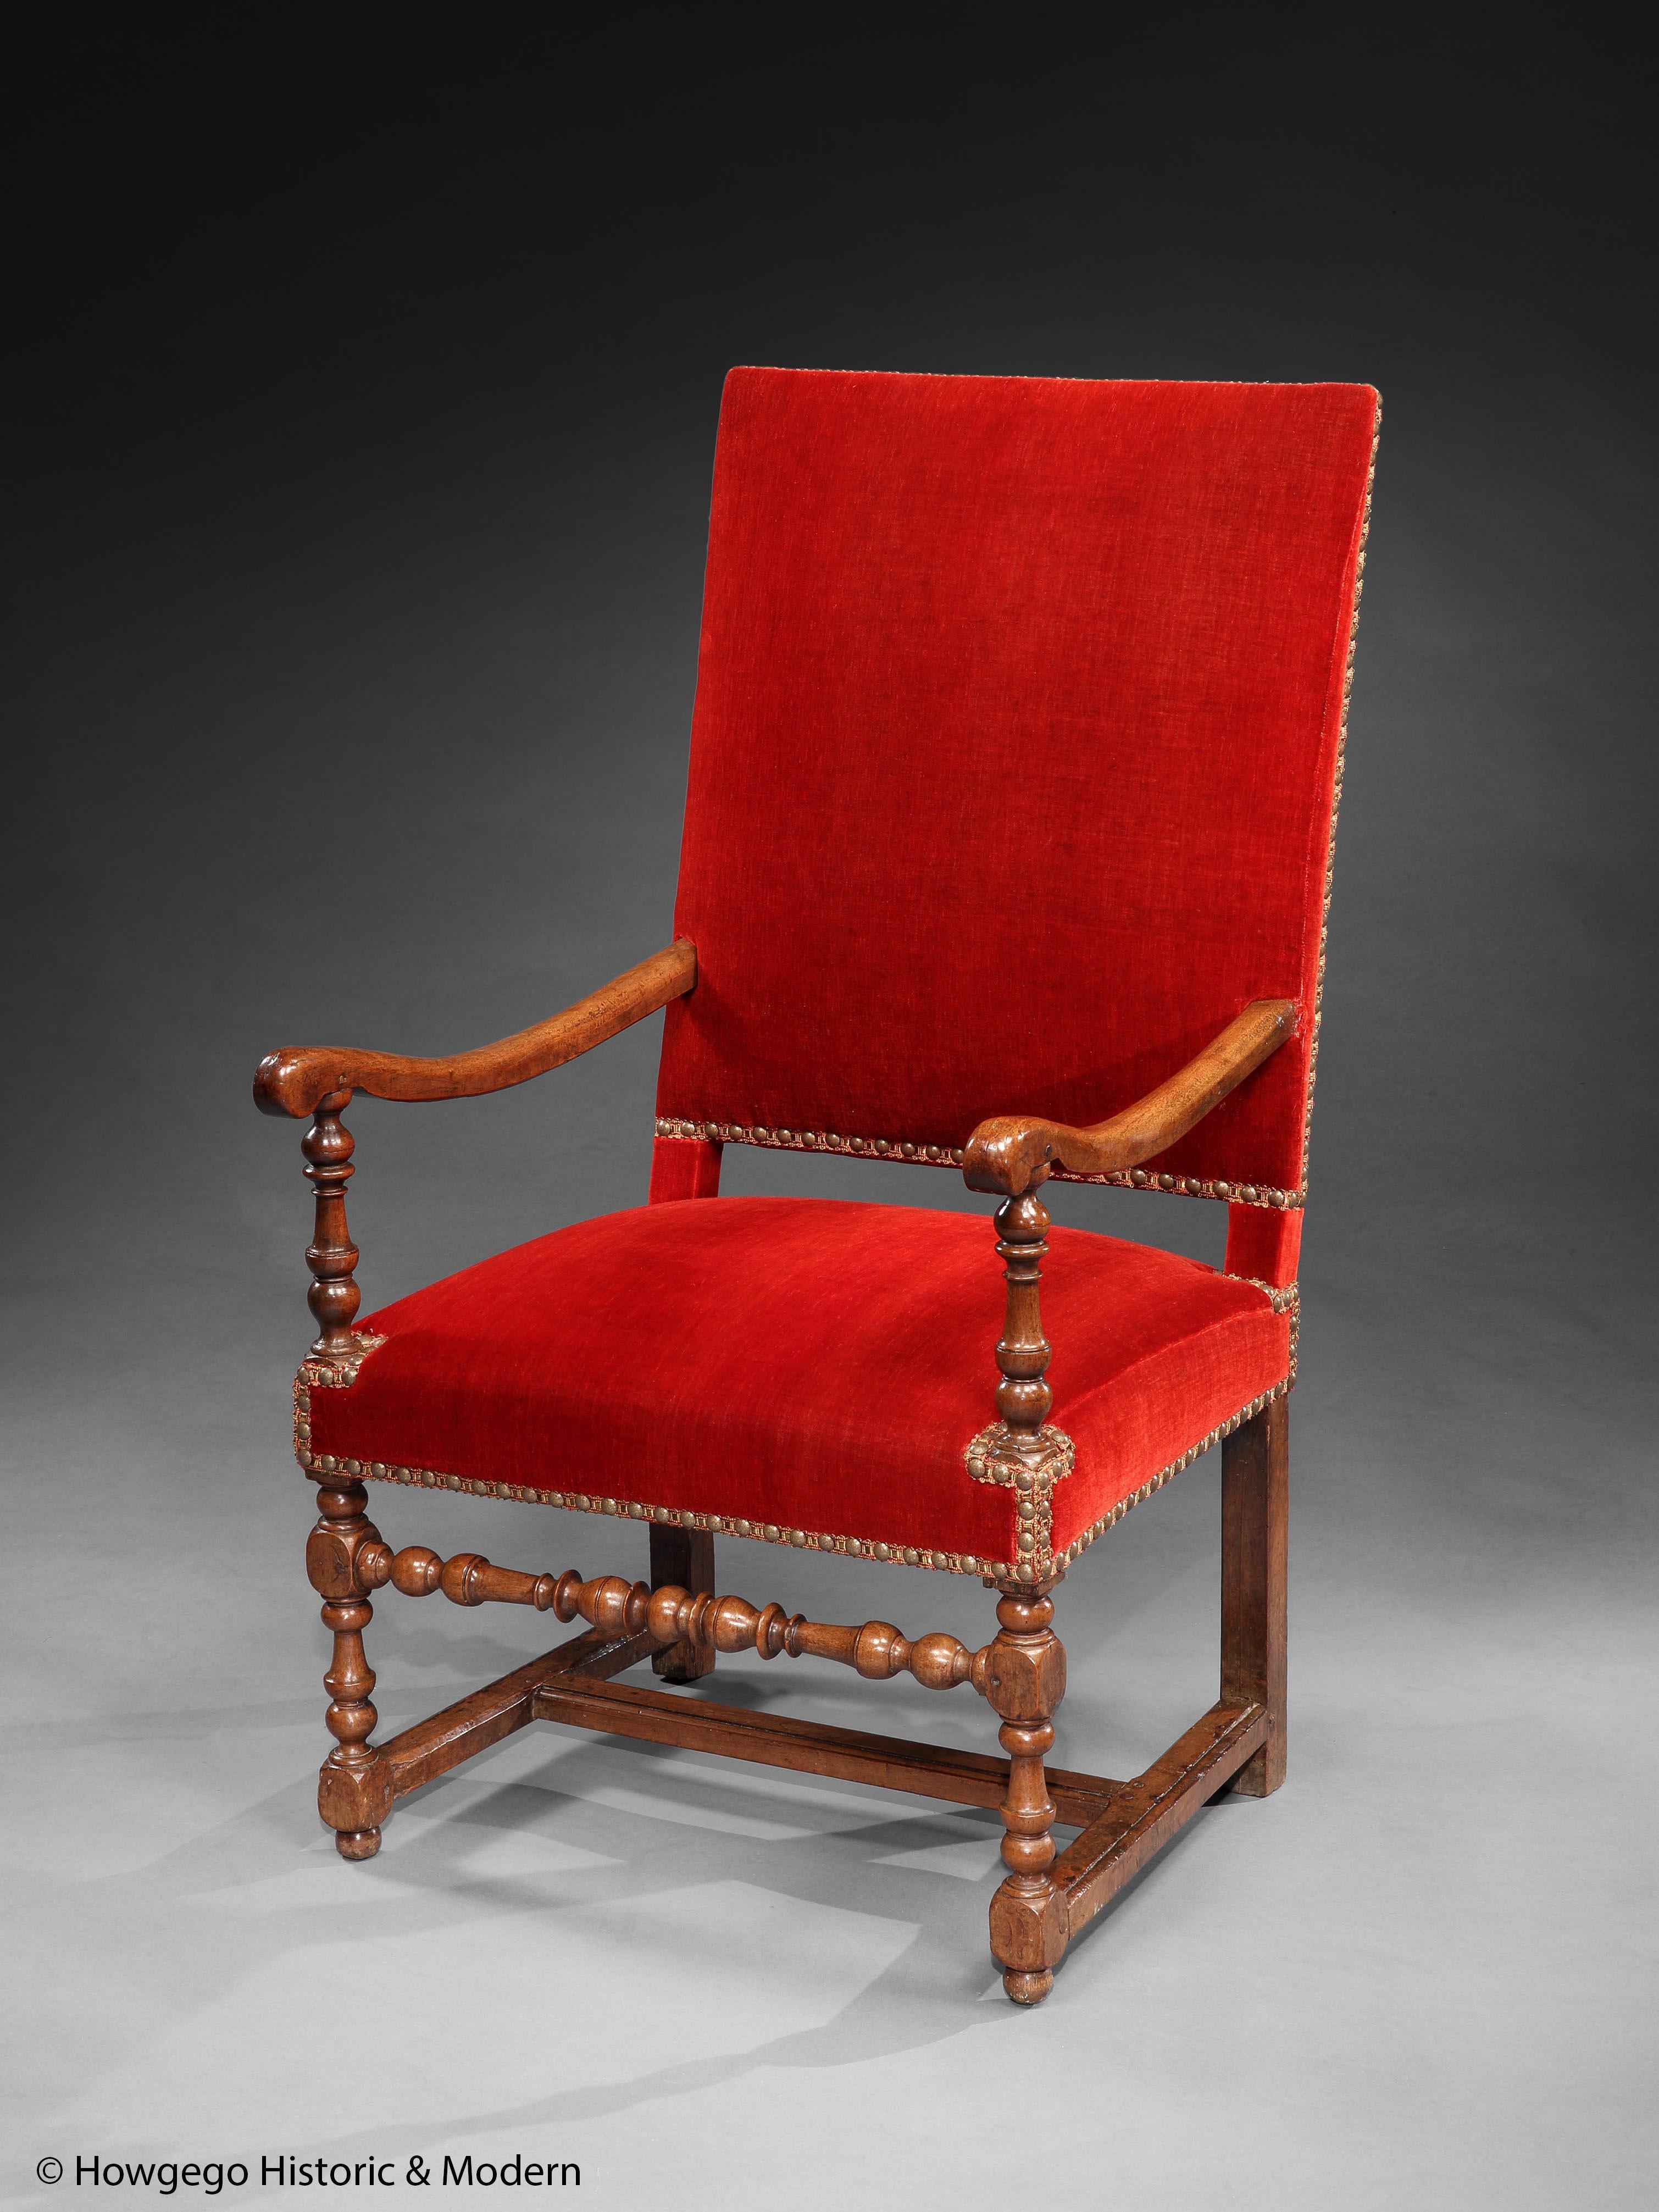 - Elegant period armchair injecting character to any interior
- Practical, sturdy and suitable for regular use
- Re-upholstered in a 19th century, rust, mohair velvet faced with rust and gold silk braid and gilded nails. 

The rectangular back